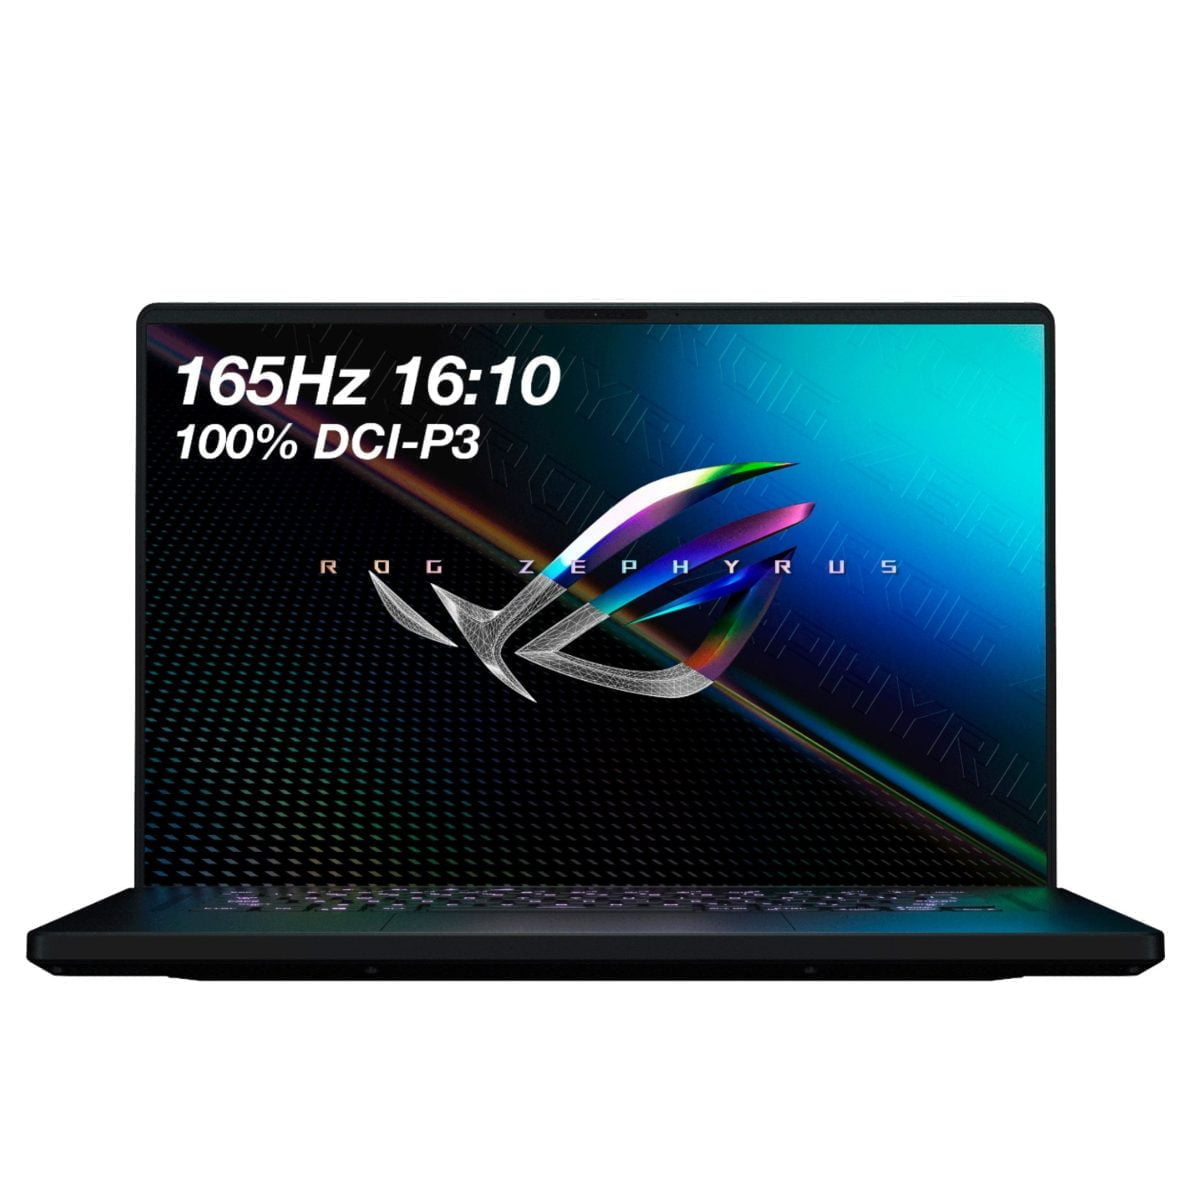 6464203 Sd Asus &Lt;H1 Class=&Quot;Heading-5 V-Fw-Regular&Quot;&Gt;Asus - Rog Zephyrus M16 Gu603 Gaming Laptop - Intel Core I9 - 16Gb Memory - Nvidia Rtx3060 - 1Tb Ssd - Off Black&Lt;/H1&Gt;&Lt;Div Class=&Quot;Wpview Wpview-Wrap&Quot; Data-Wpview-Text=&Quot;Https%3A%2F%2Fyoutu.be%2Fmjlzzqnixki&Quot; Data-Wpview-Type=&Quot;Embedurl&Quot;&Gt;&Lt;Span Class=&Quot;Mce-Shim&Quot;&Gt;&Lt;/Span&Gt;&Lt;Span Class=&Quot;Wpview-End&Quot;&Gt;&Lt;/Span&Gt;&Lt;/Div&Gt;&Lt;P&Gt;Asus Rog Gaming Laptop. Enjoy Everyday Gaming With This Asus Notebook Pc. The 11Th Gen Intel Core I9 Processor And 16Gb Of Ram Let You Run Graphics-Heavy Games Smoothly, While The Potent Nvidia Rtx3060 Graphics Produce High-Quality Visuals On The New Fast 16-Inch 165Hz Wqxga Display. This Asus Notebook Pc Has 1Tb Ssd That Shortens Load Times And Offers Ample Storage.&Lt;/P&Gt; Asus Rog Gaming Laptop Asus - Rog Zephyrus M16 Gu603 Gaming Laptop - Intel Core I9 - 16Gb Memory - Nvidia Rtx3060 - 1Tb Ssd - Off Black